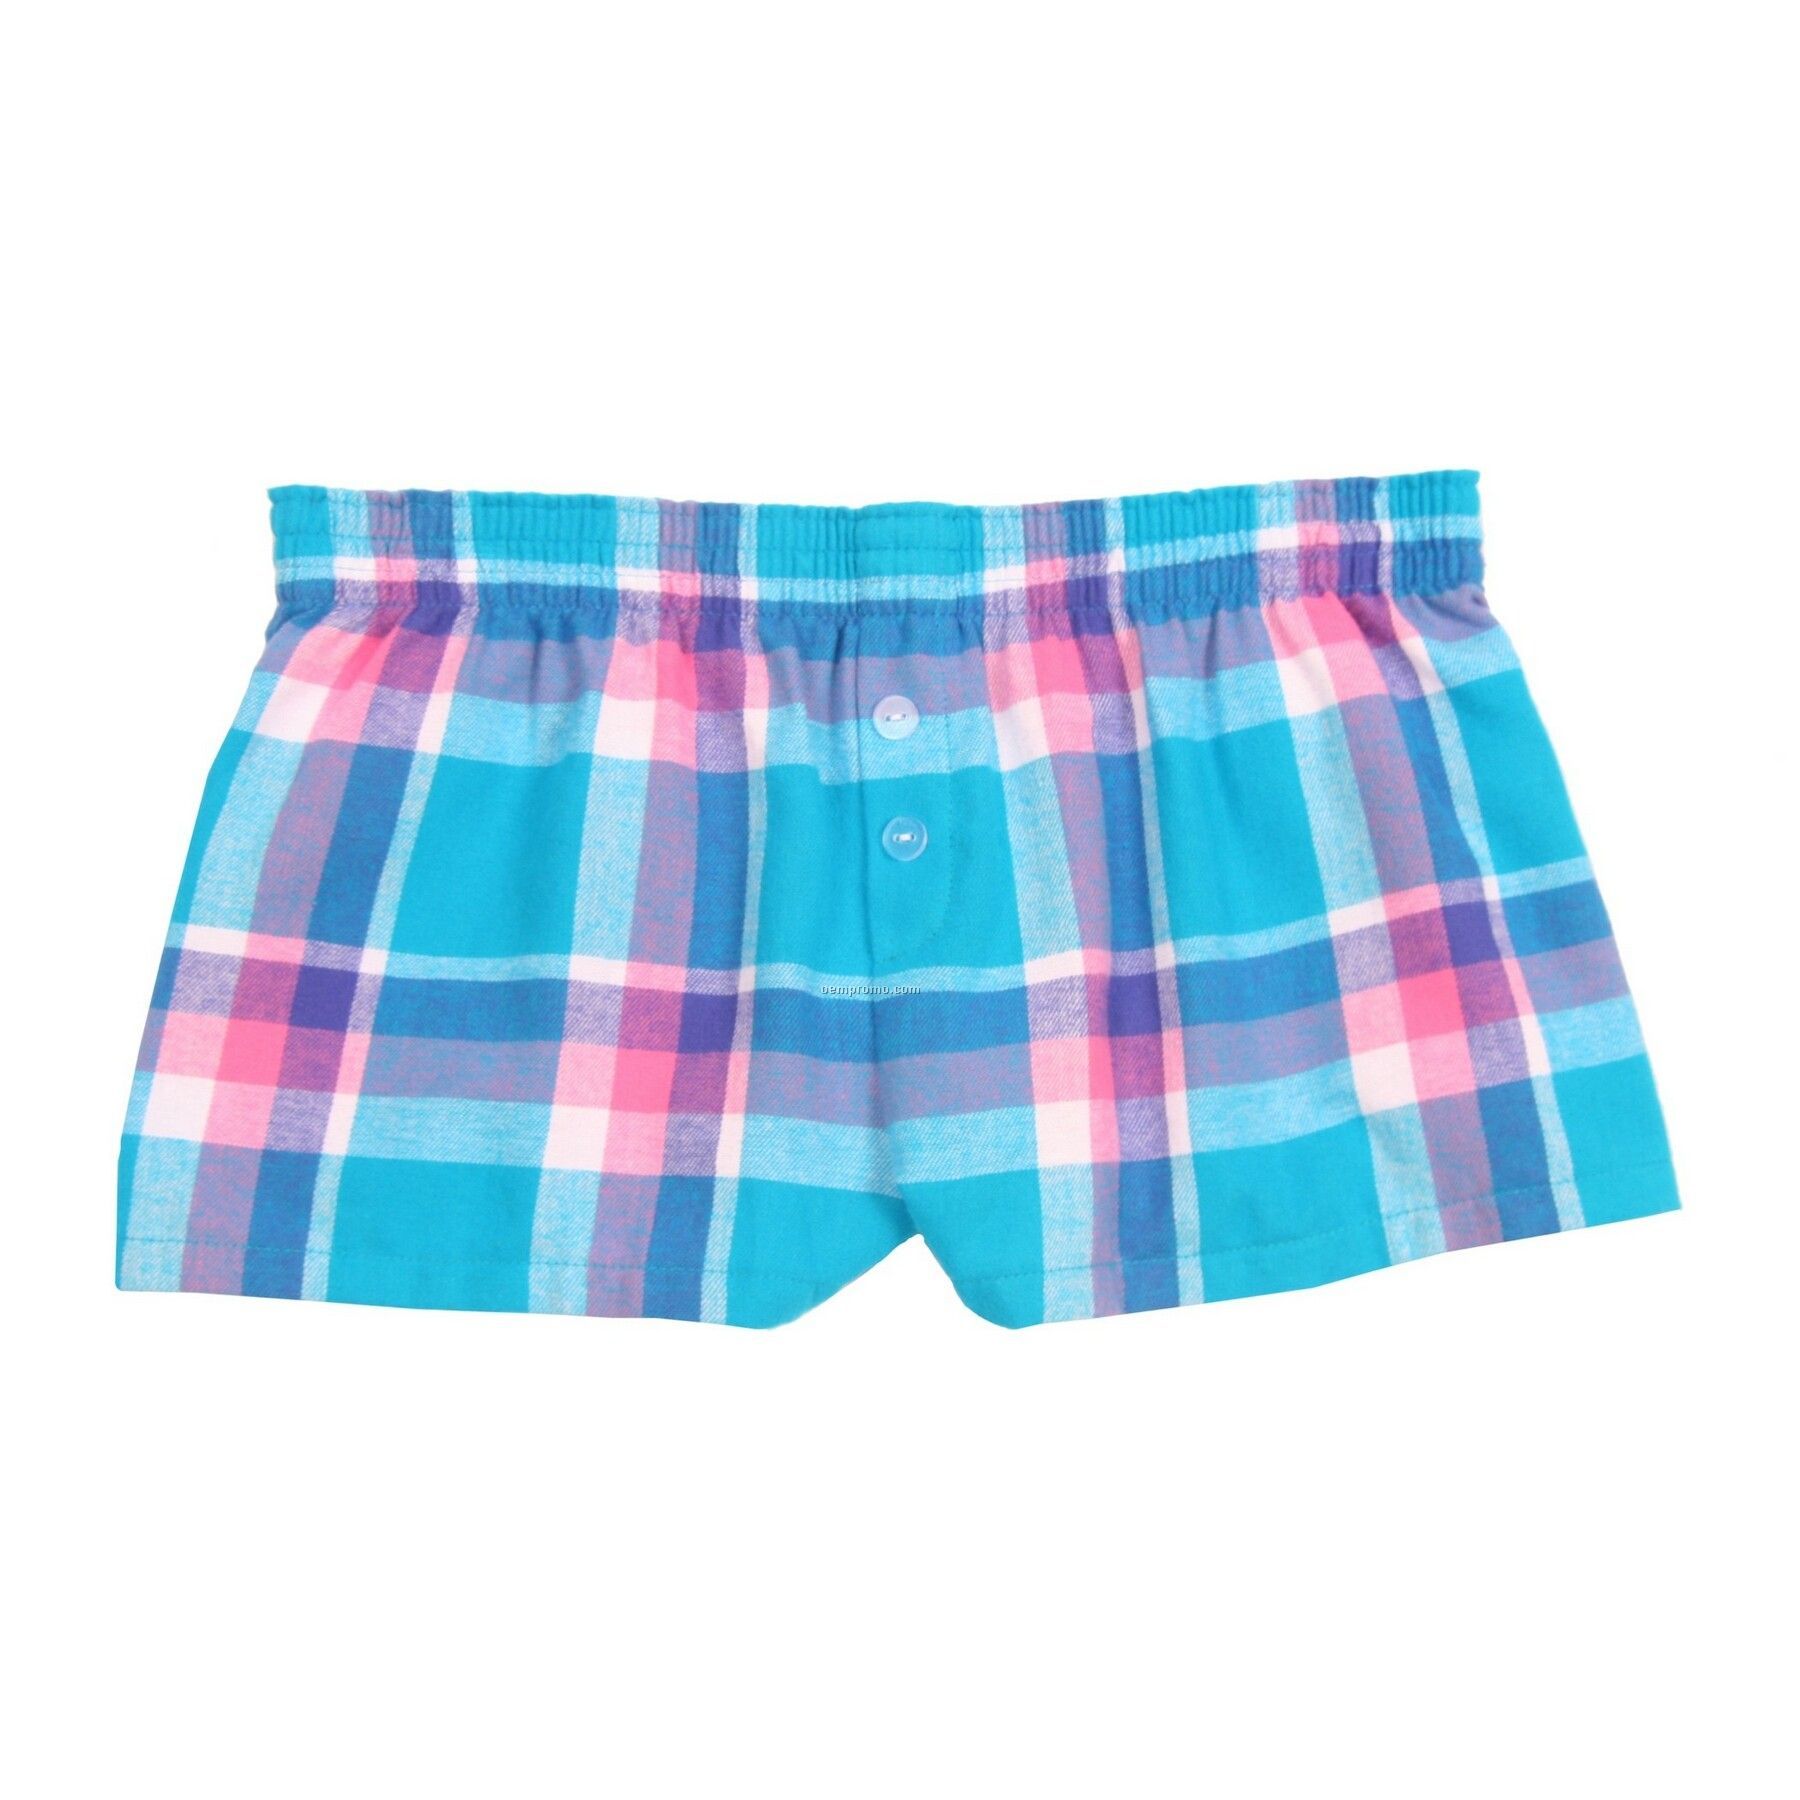 Ladies Pacific Surf Flannel Bitty Boxer Short